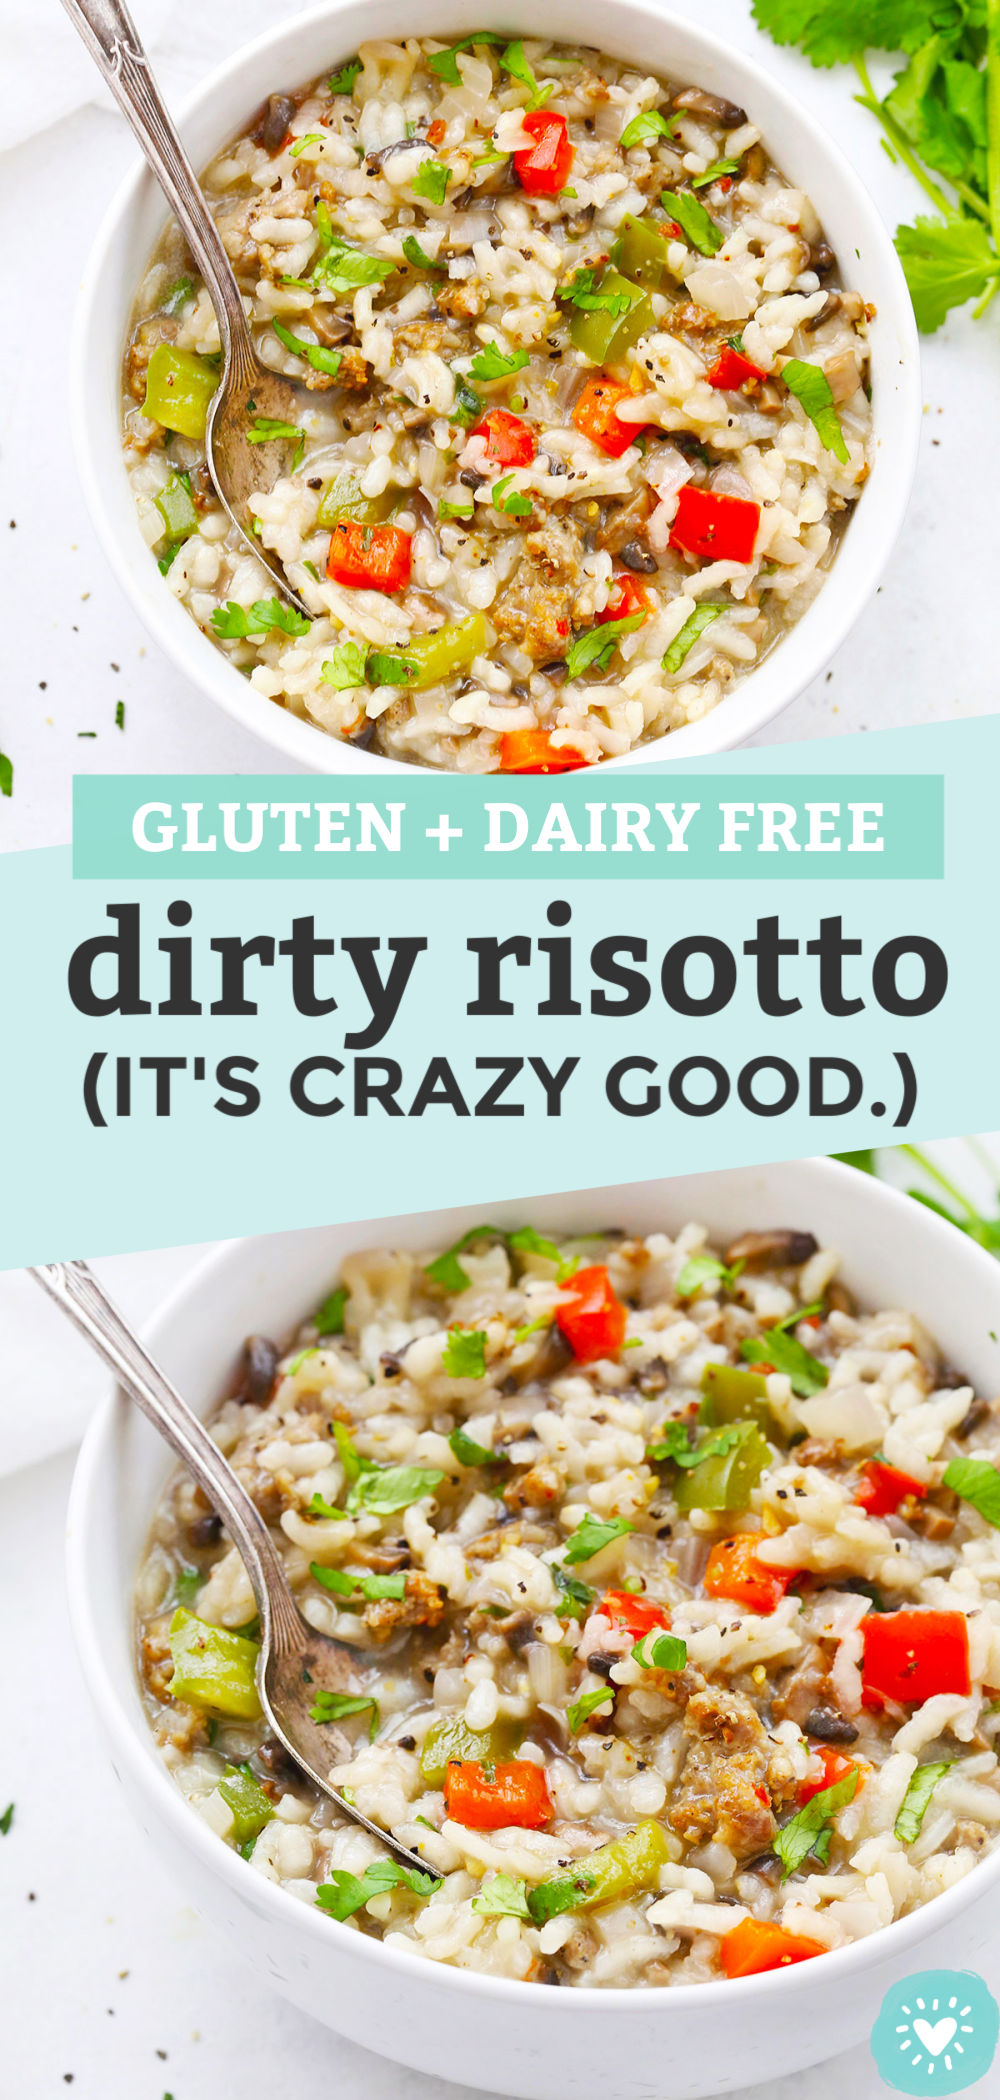 Dirty Risotto from One Lovely Life